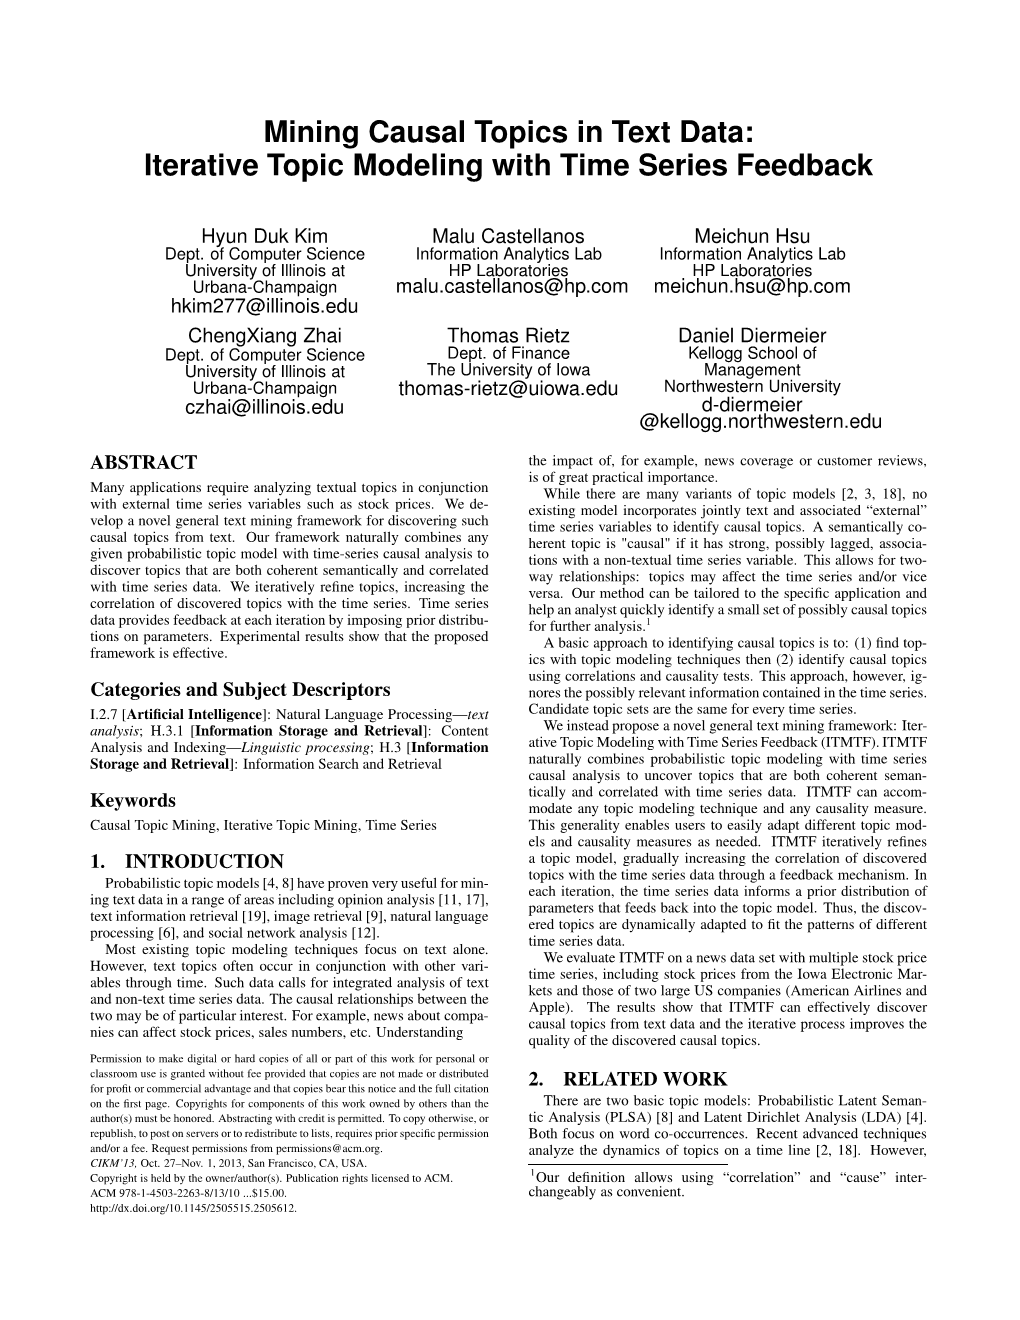 Iterative Topic Modeling with Time Series Feedback